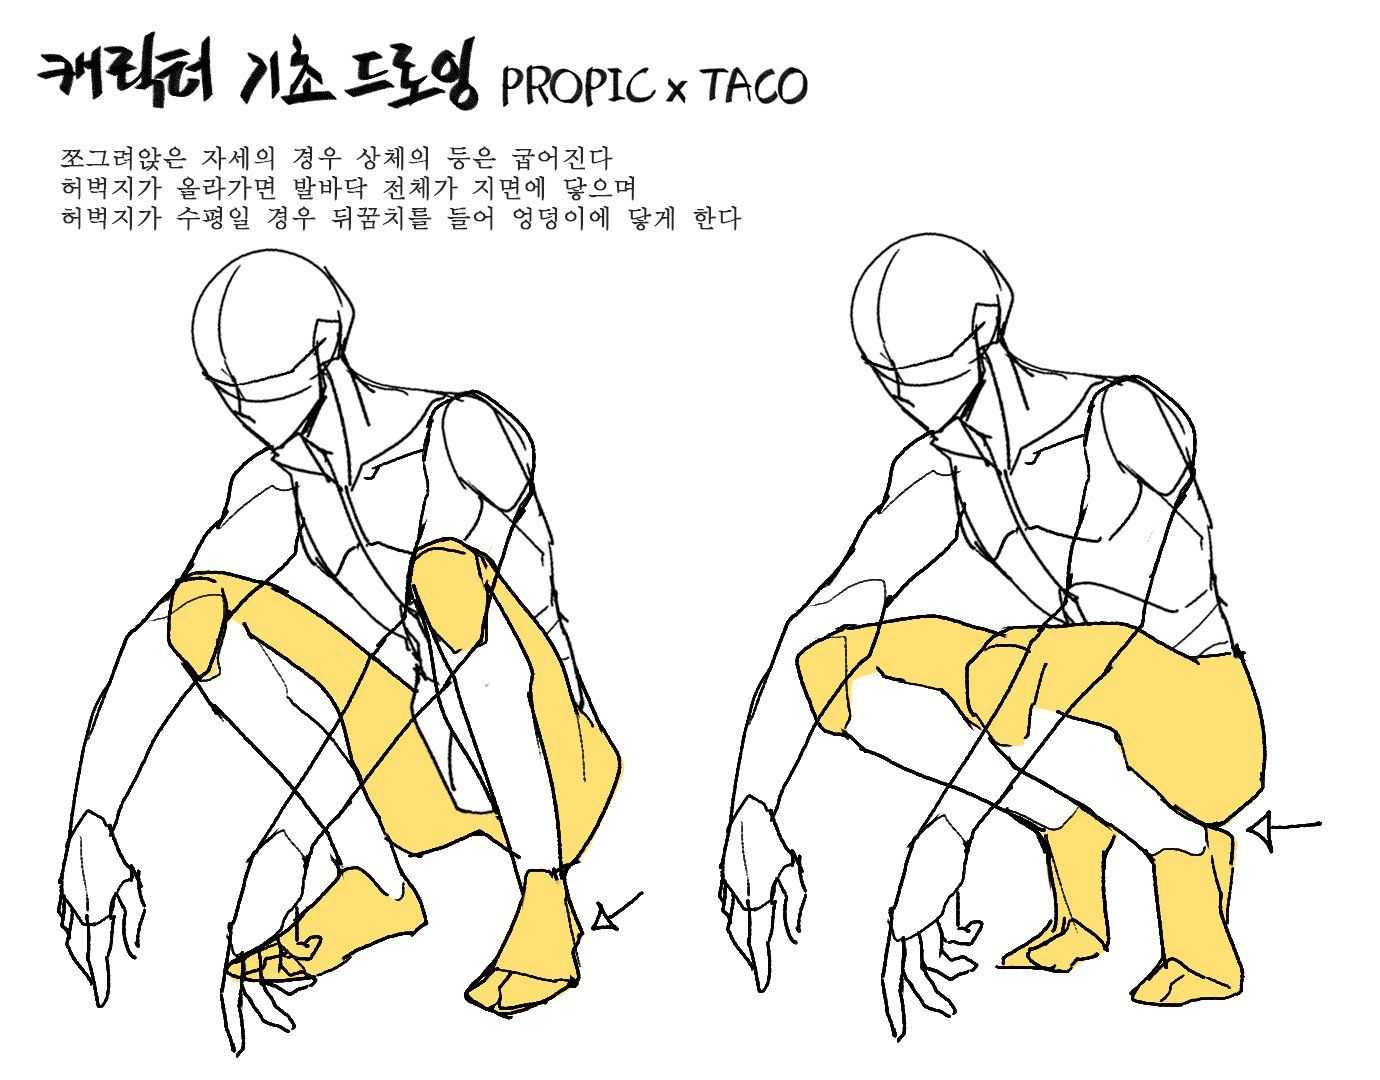 Crouching Pose Reference Drawing and Sketch Collection for Artists